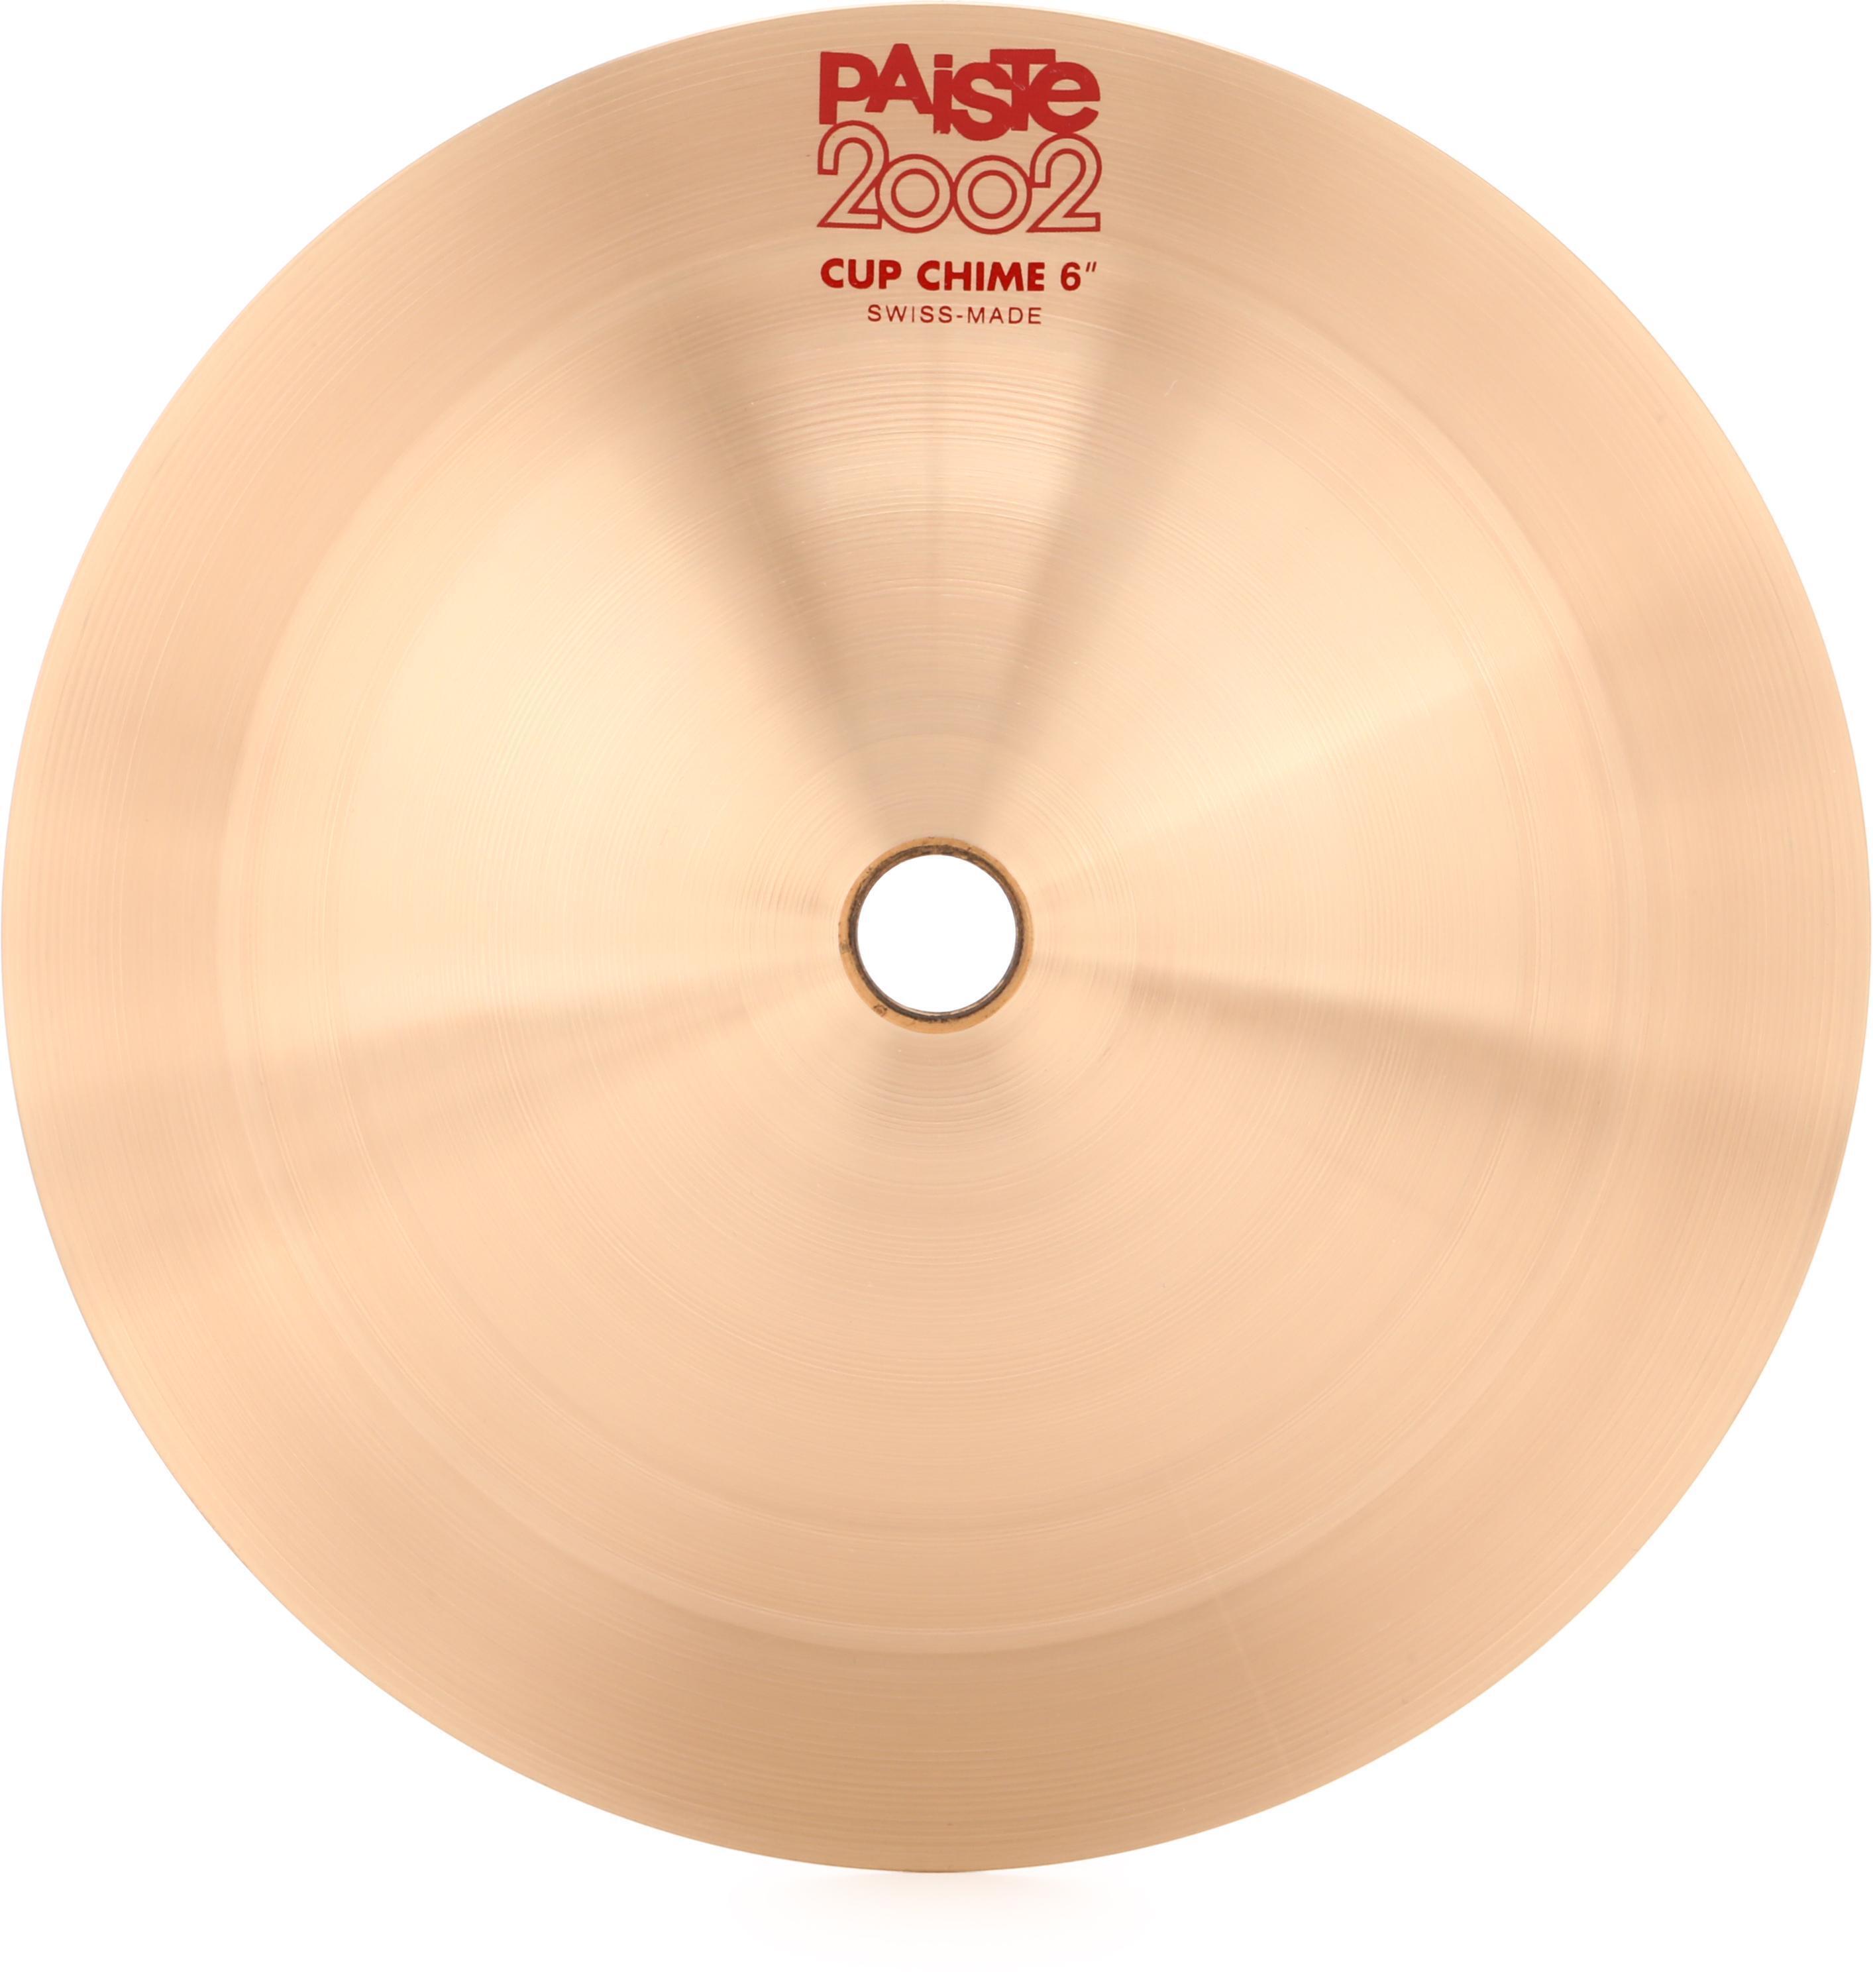 Paiste #5 2002 Cup Chime - 6 inch